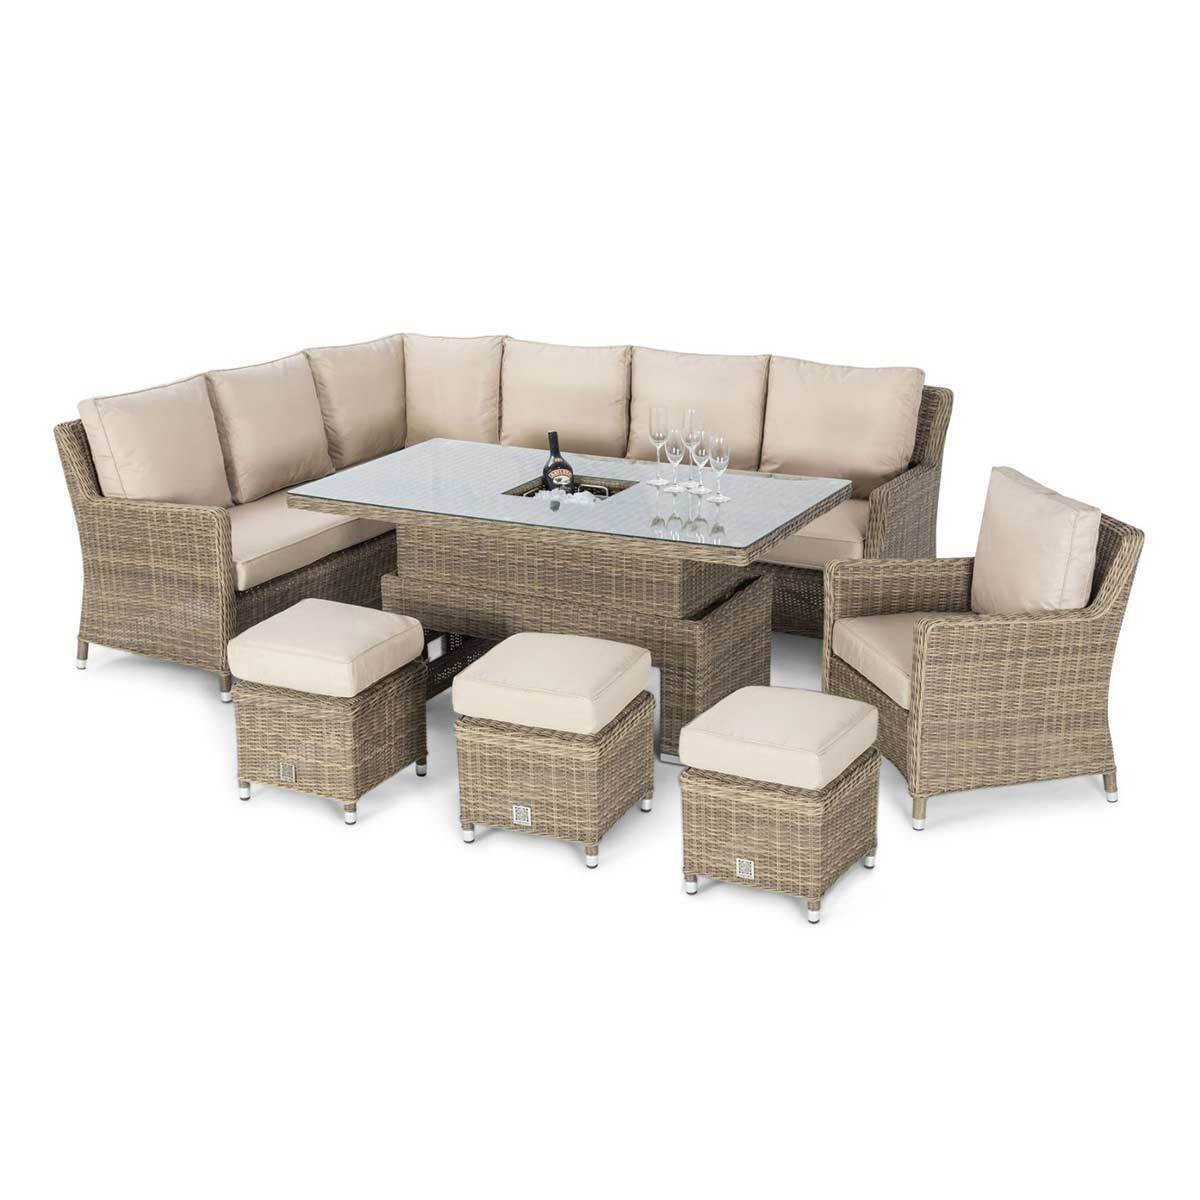 Maze - Winchester Corner Rattan Dining Set with Armchair, Ice Bucket & Rising Table product image